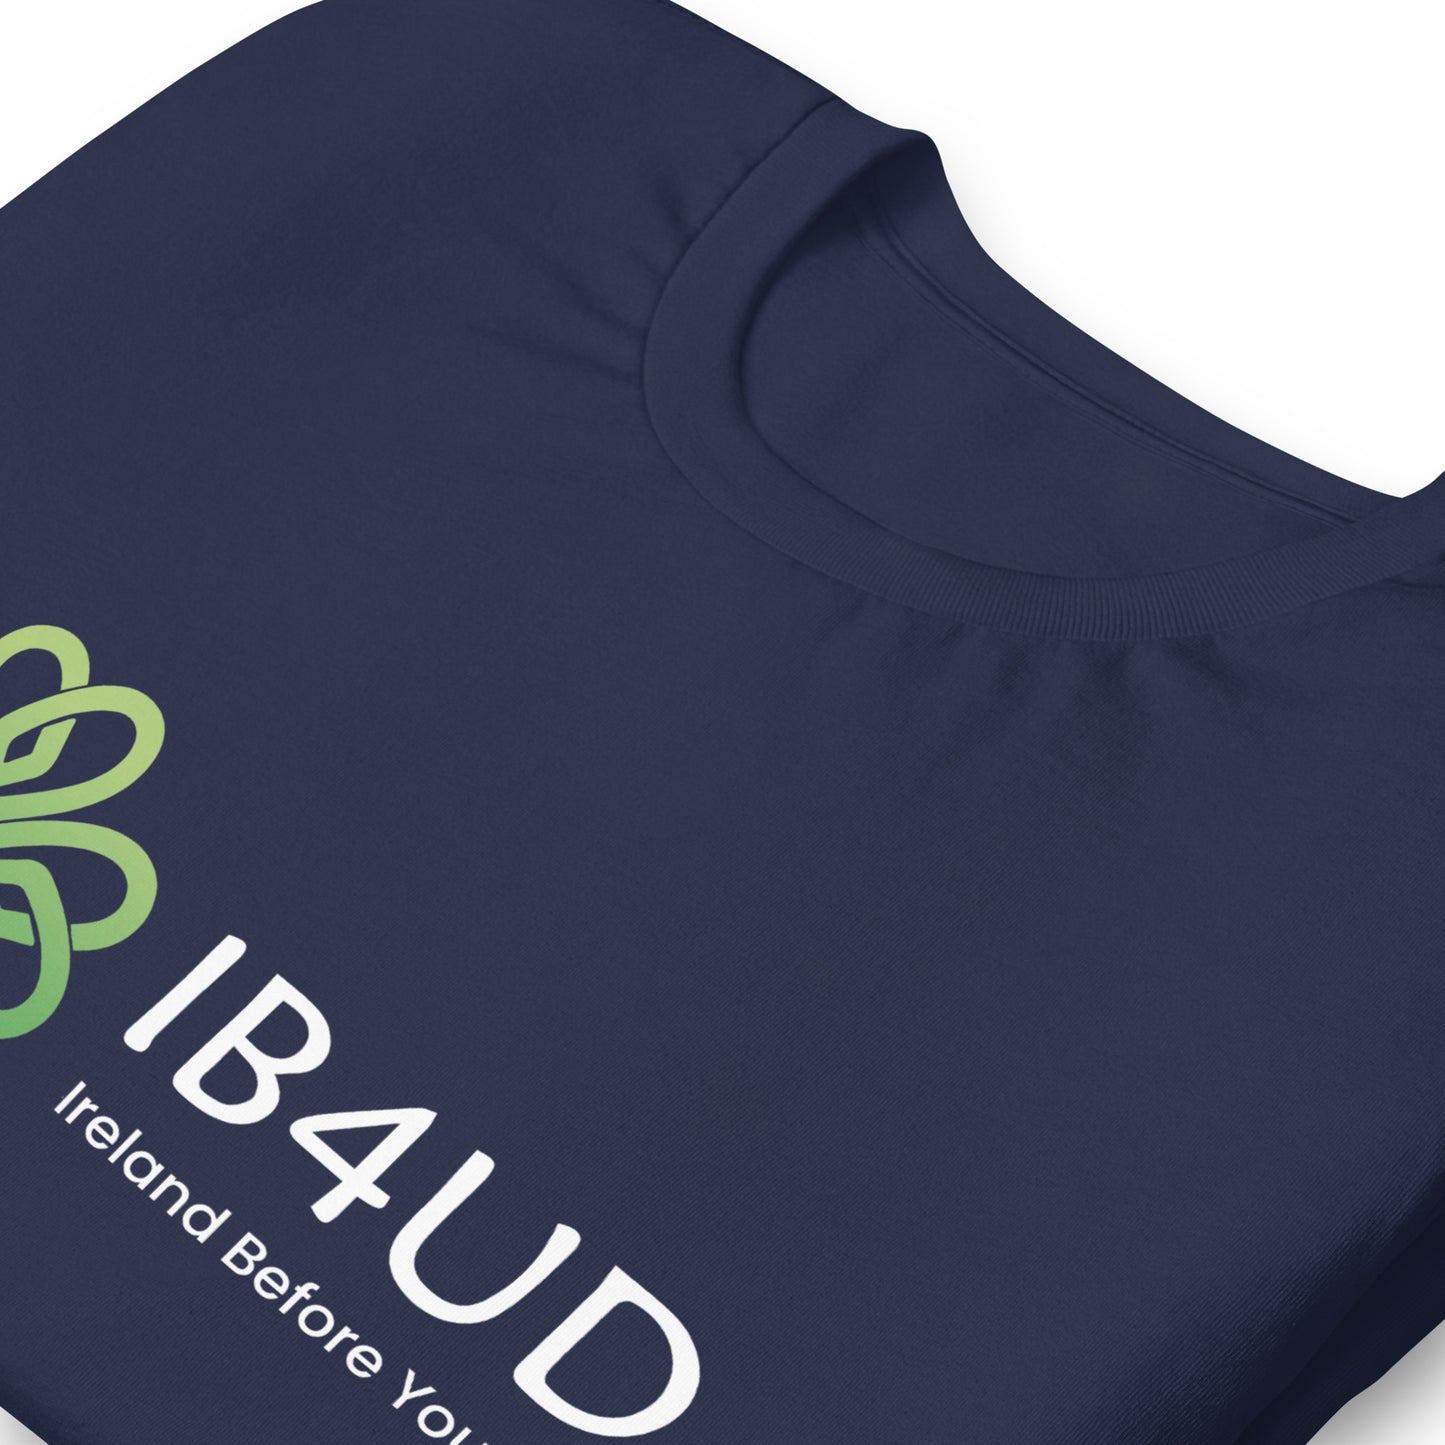 Official IB4UD T-Shirt